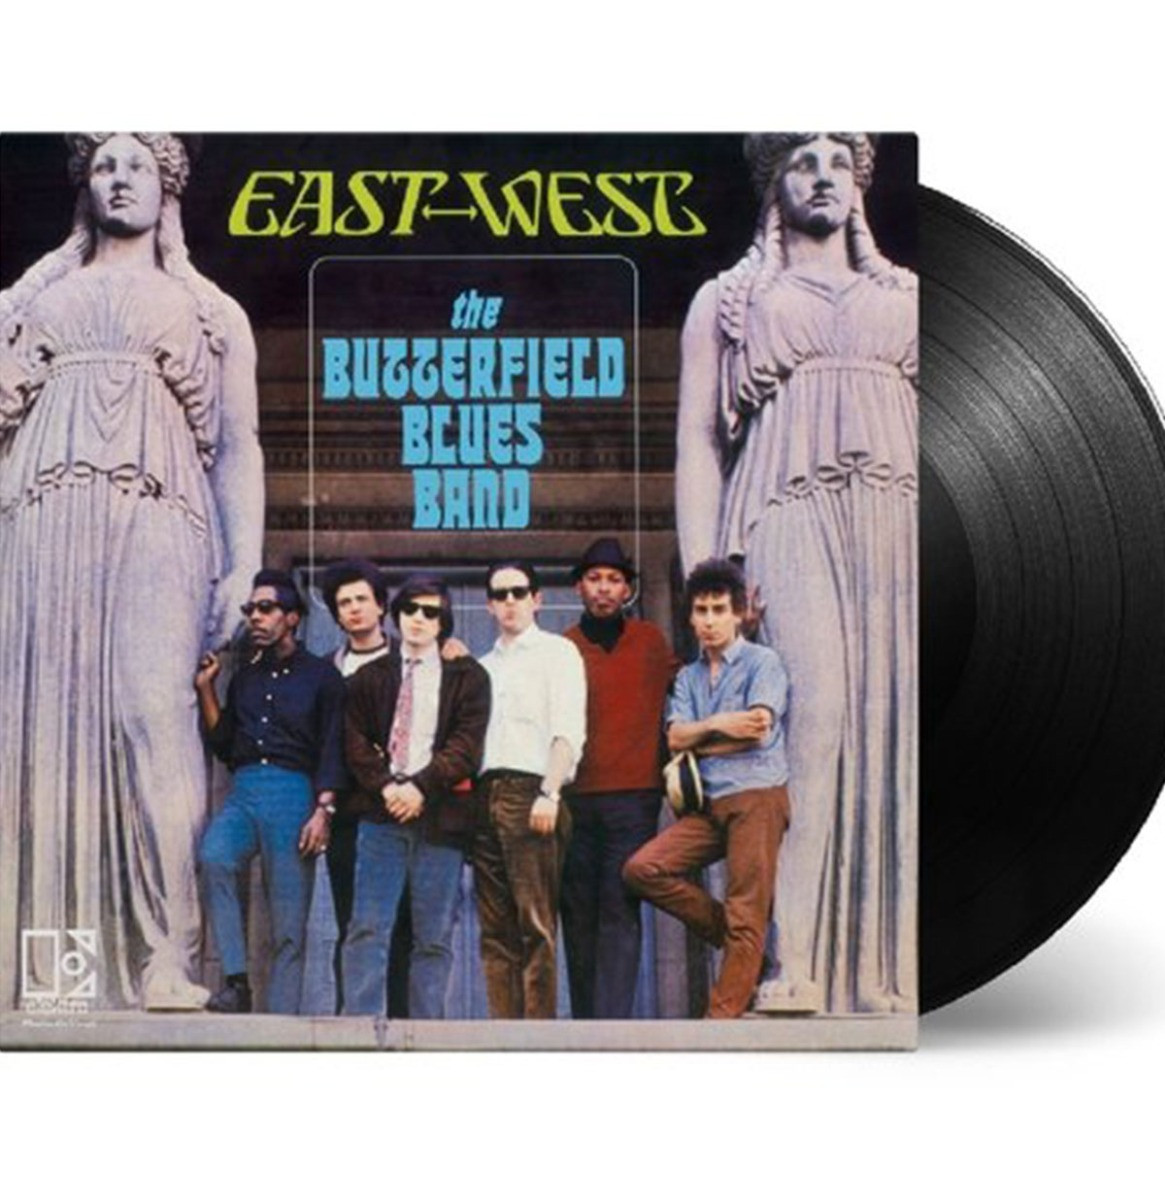 The Butterfield Blues Band - East-West LP